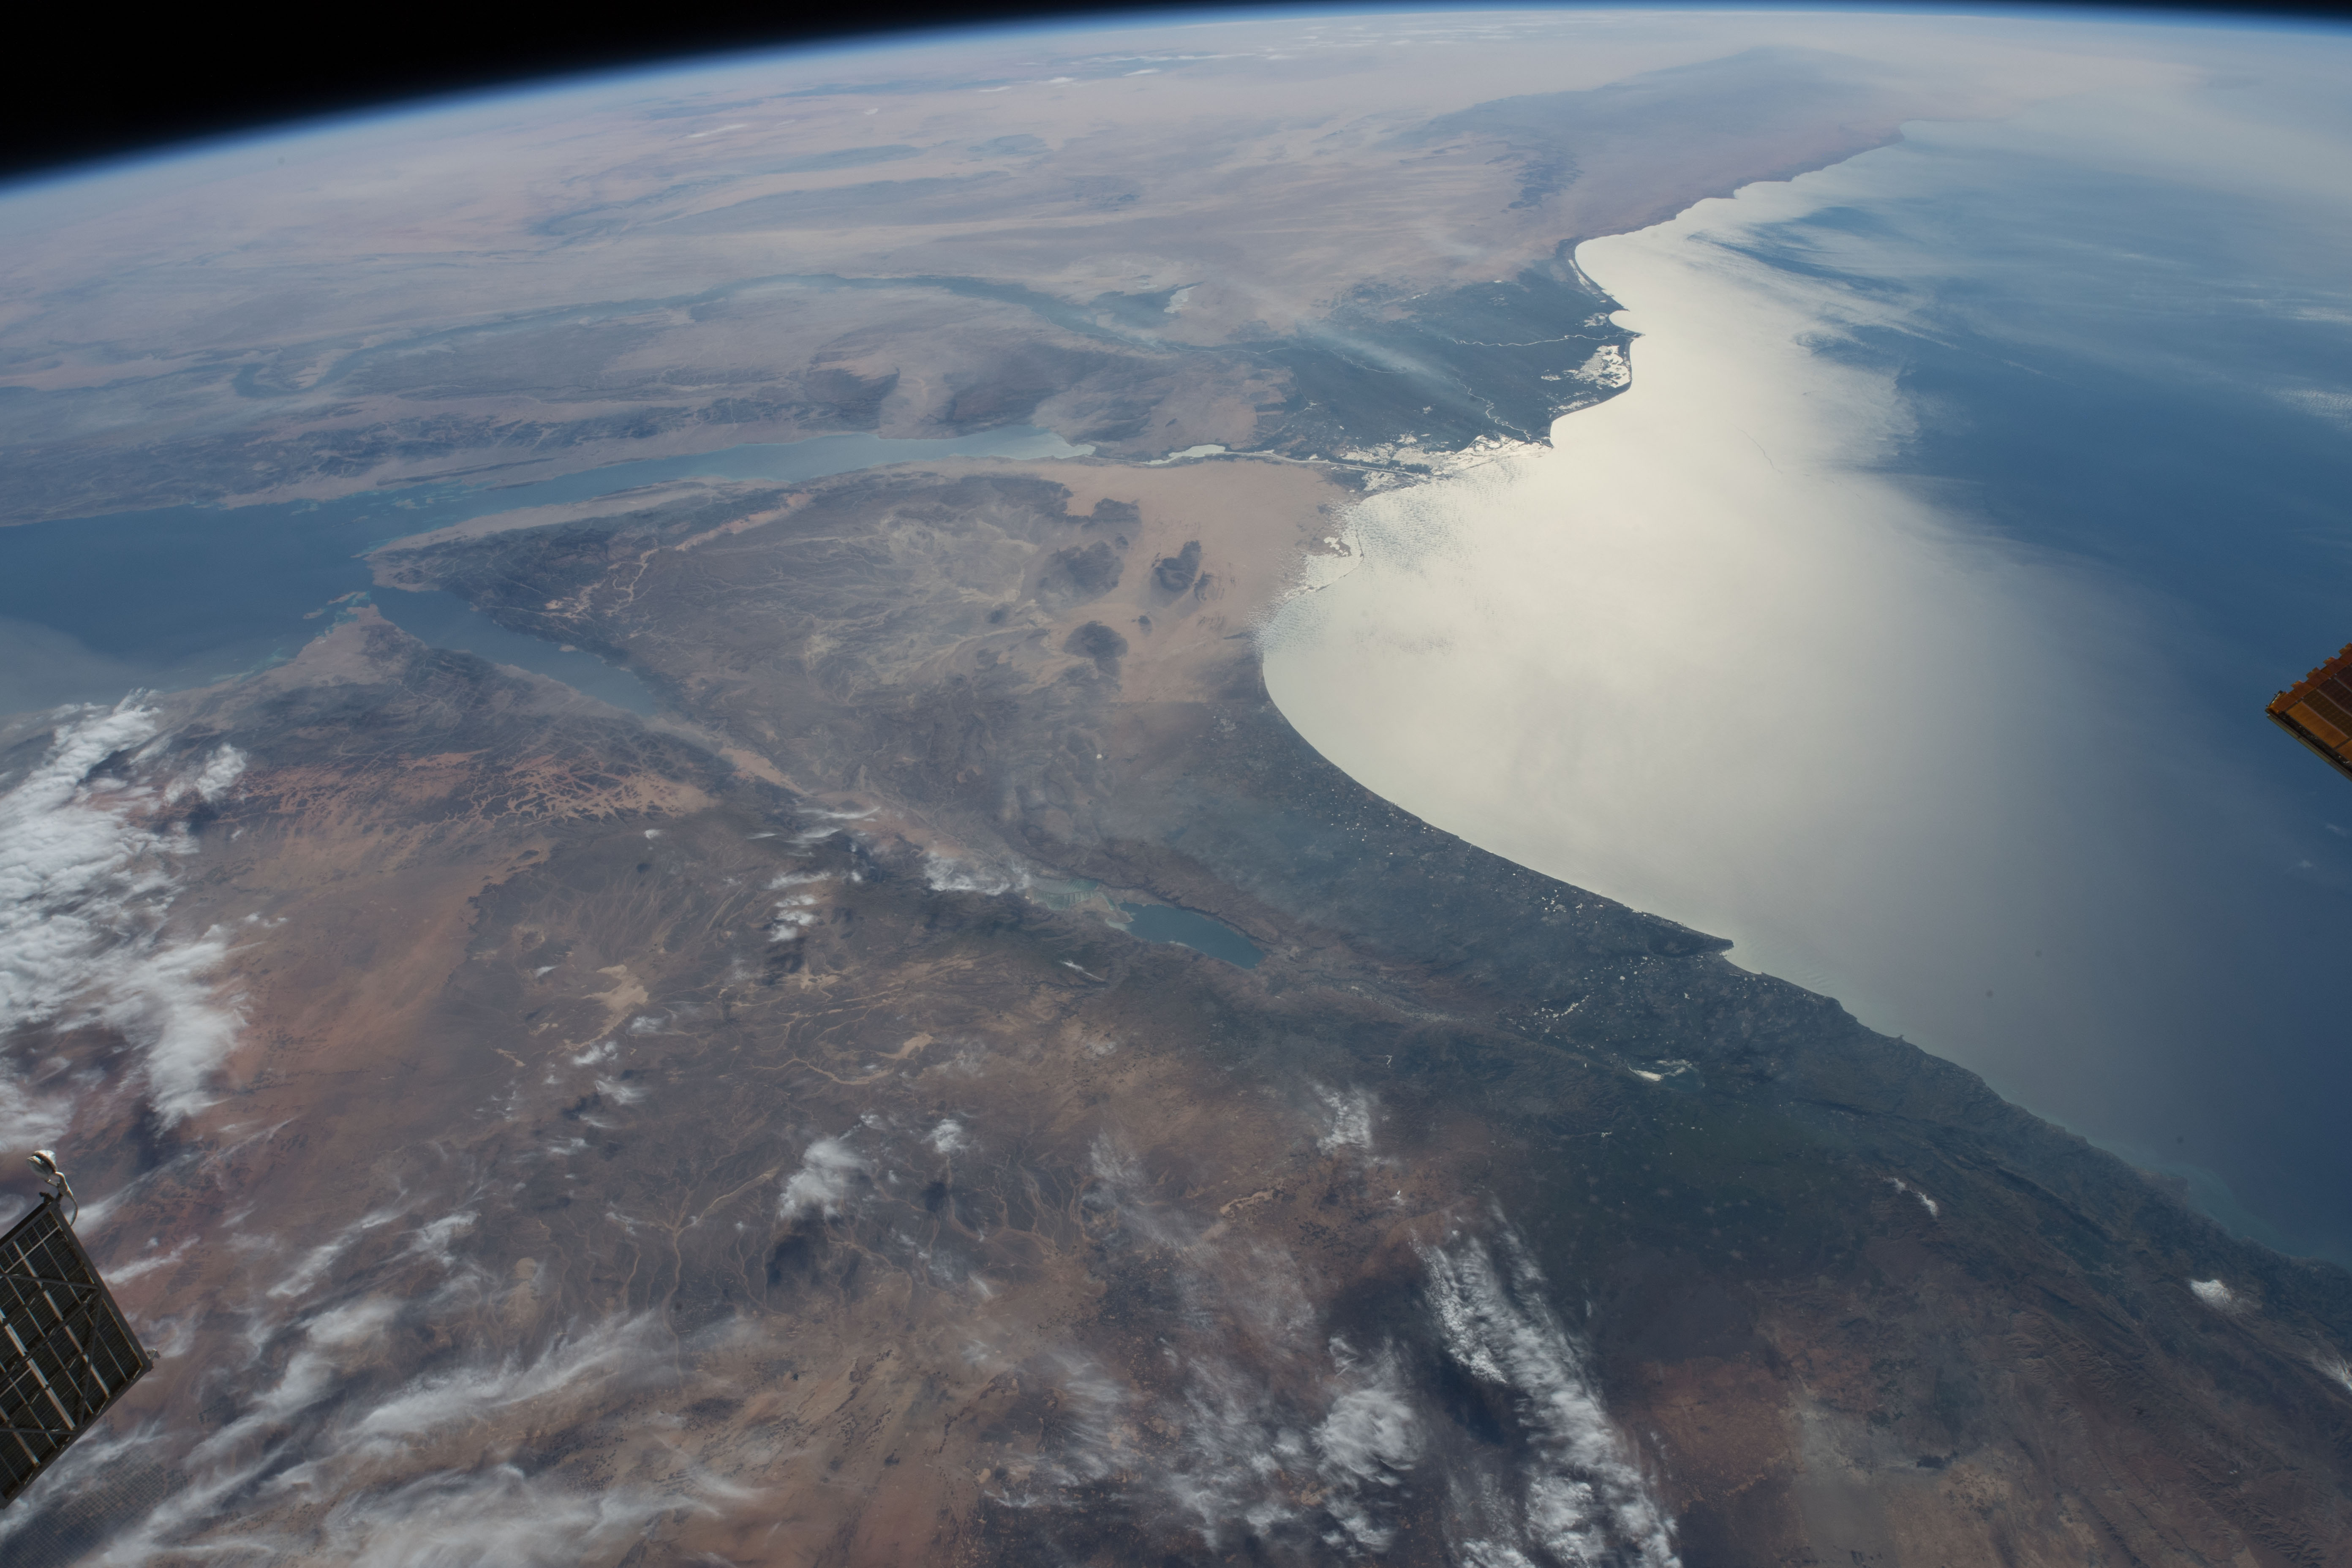 Nile River captured from the ISS